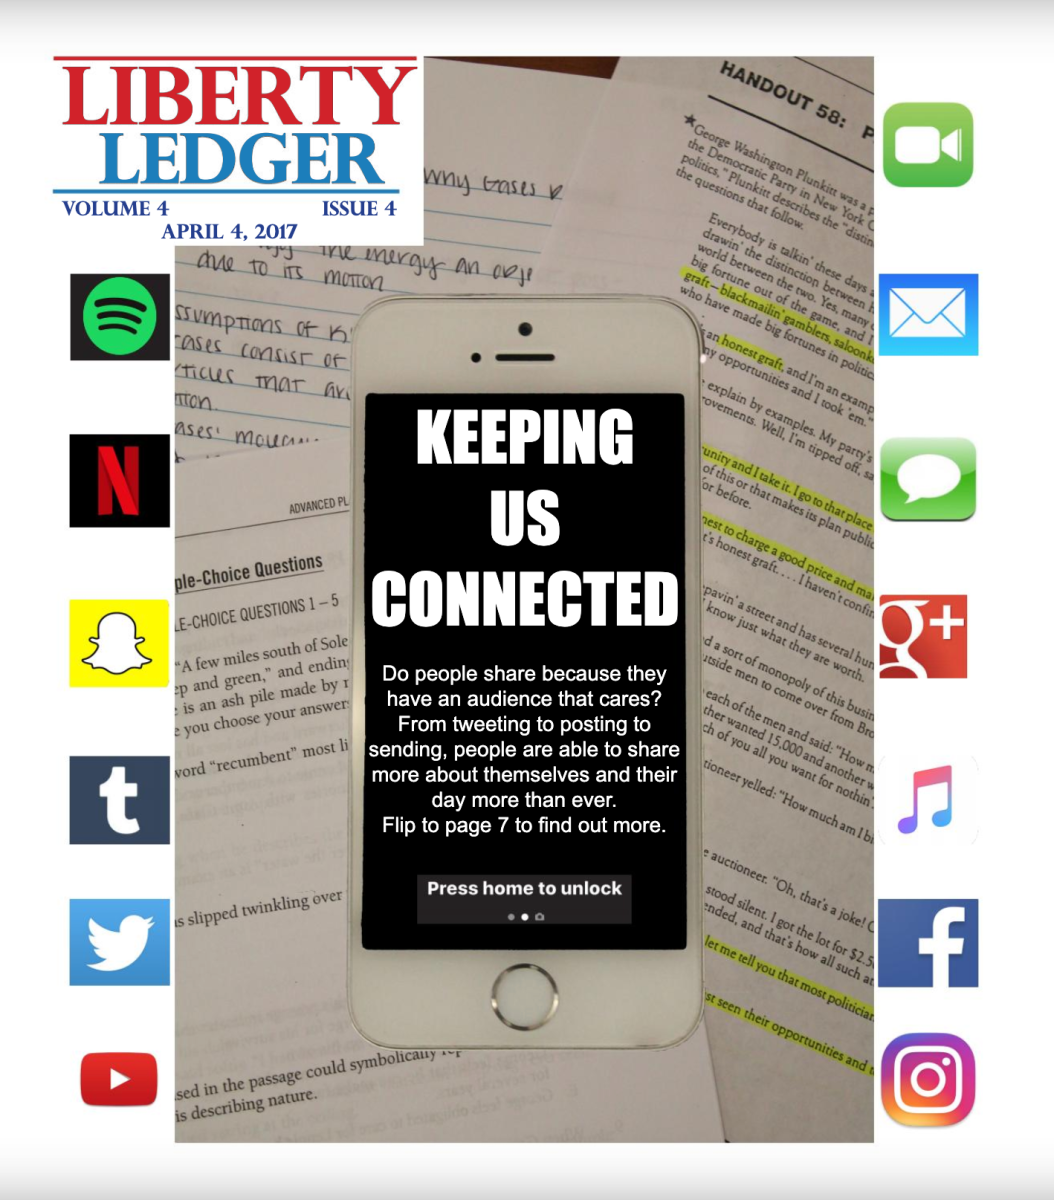 The Ledger Volume 4 Issue 4: Keeping Us Connected